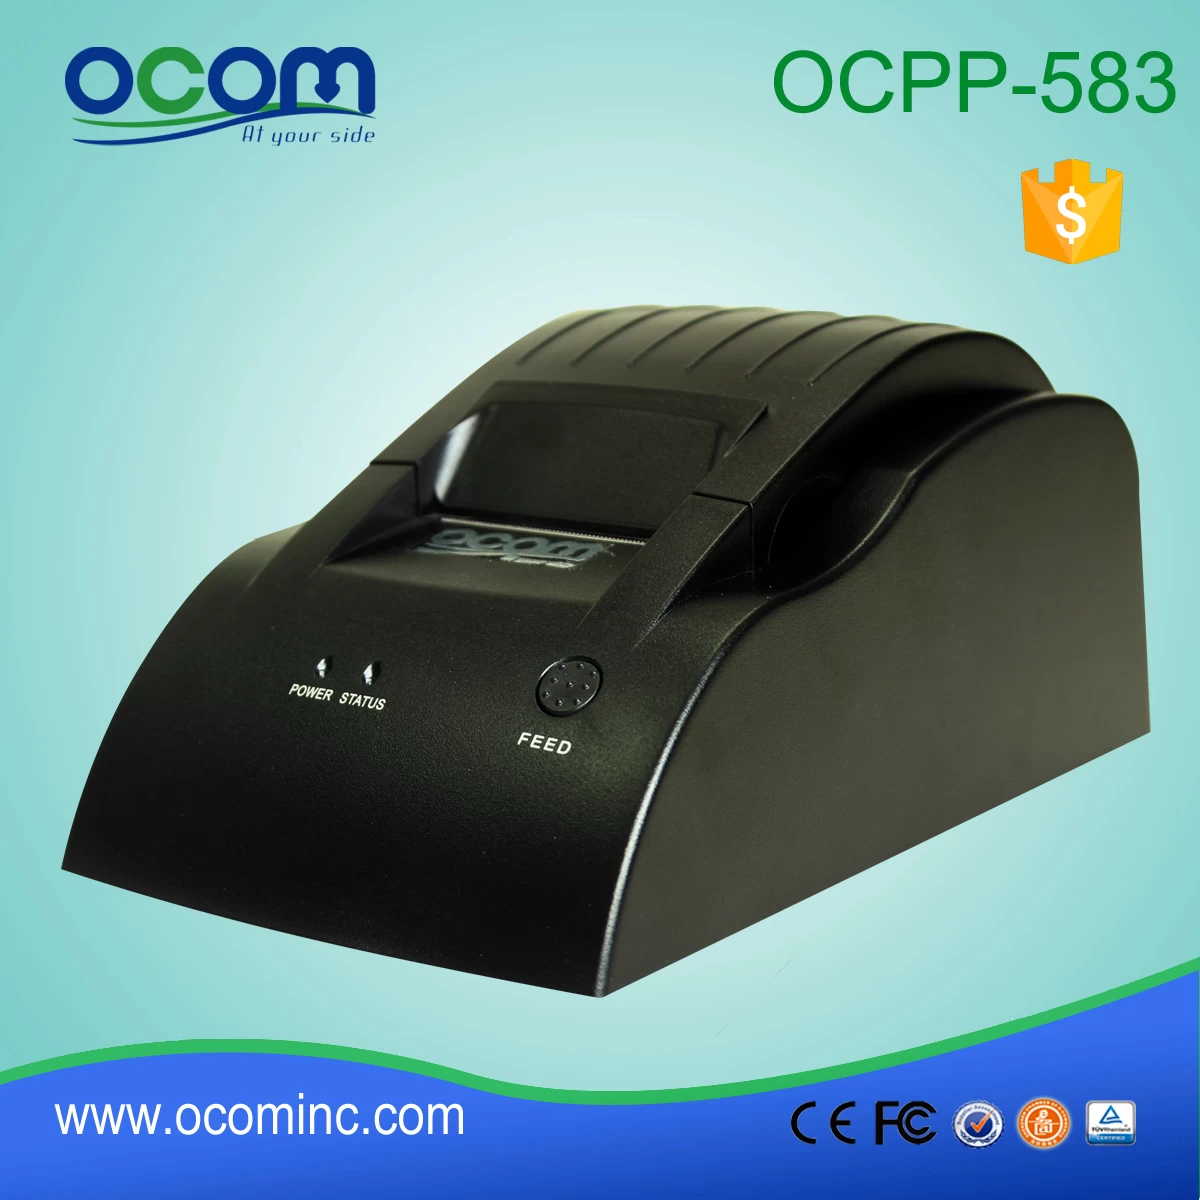 Low cost small POS thermal receipt printer-OCPP-583